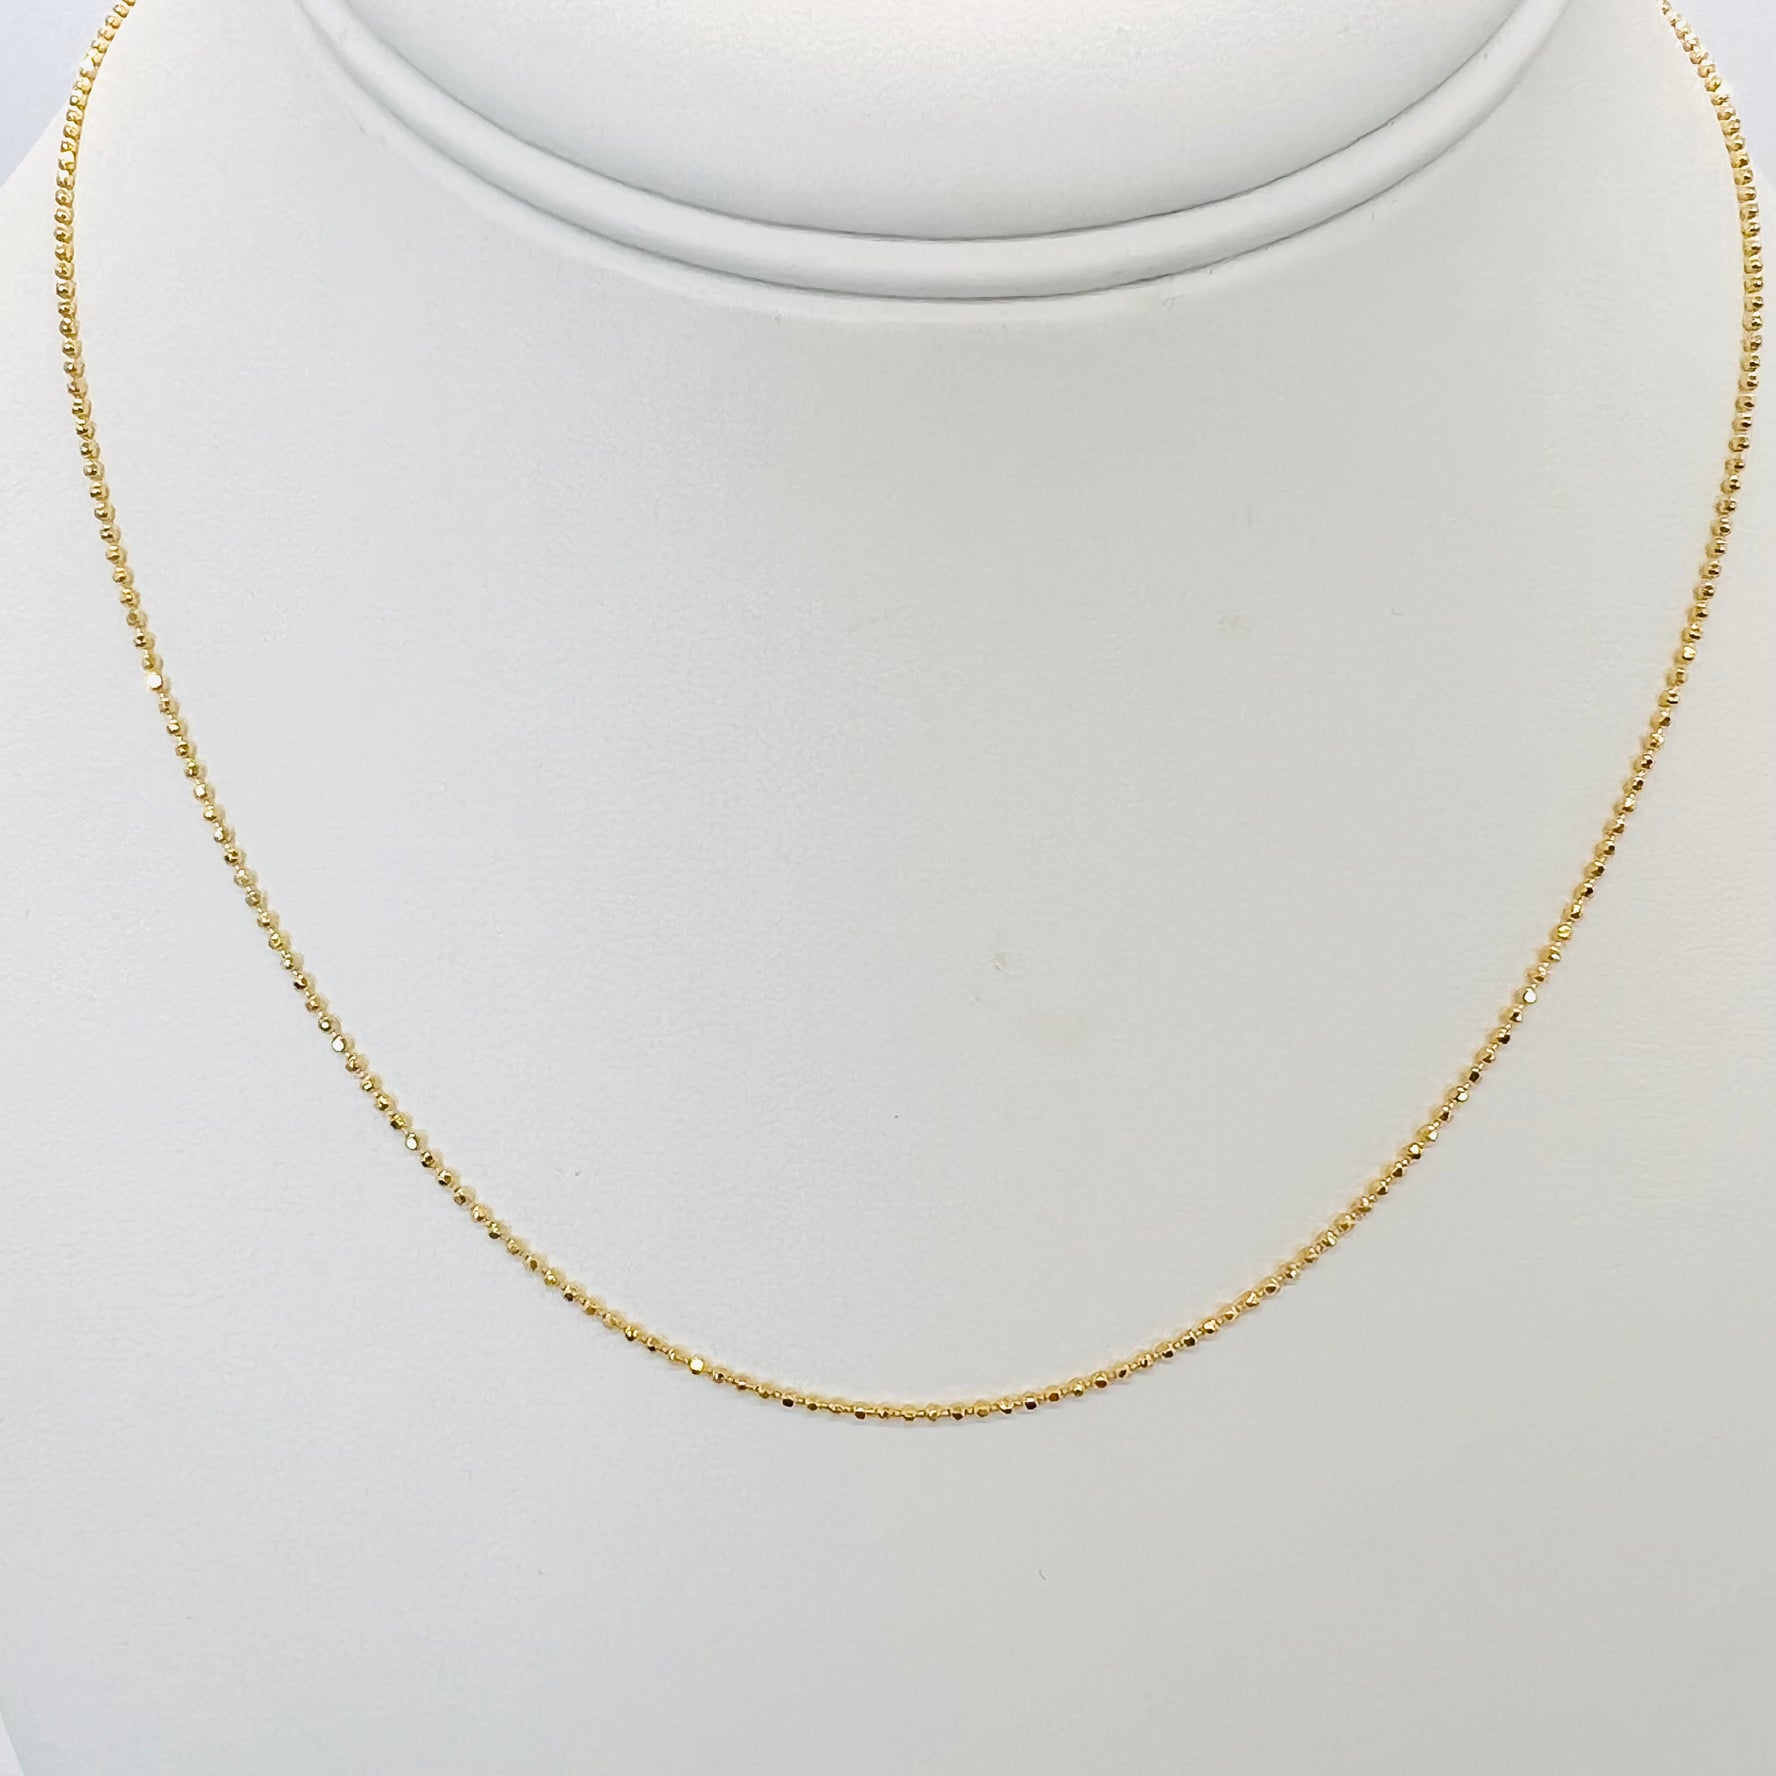 14k small ball chain necklace